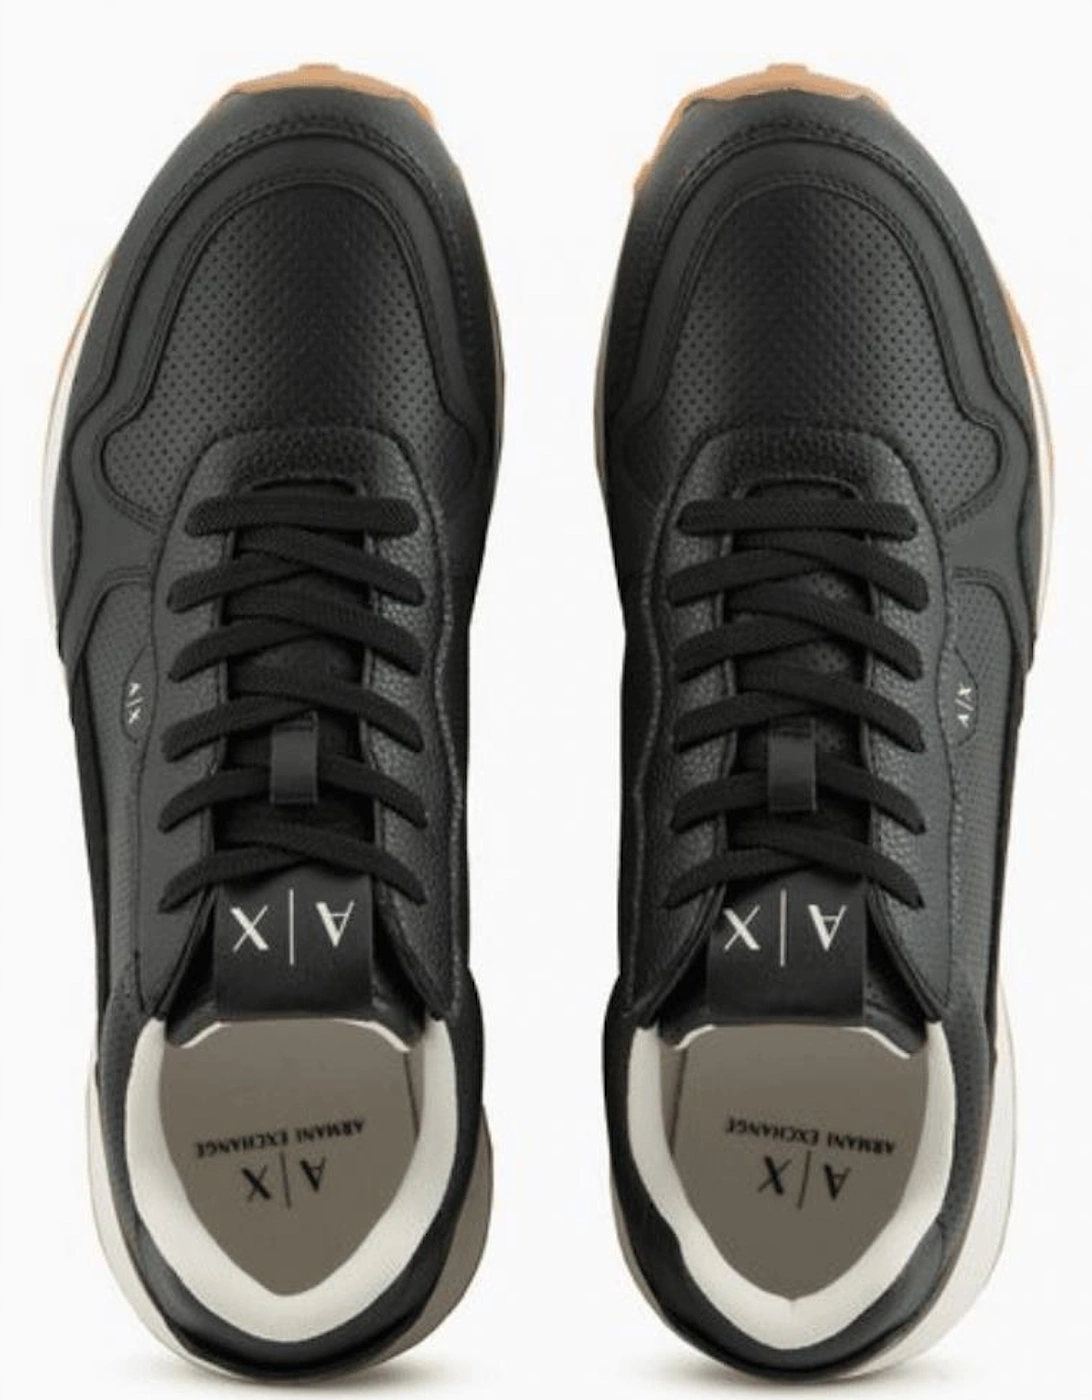 Perforated Leather Black Sneaker Trainer